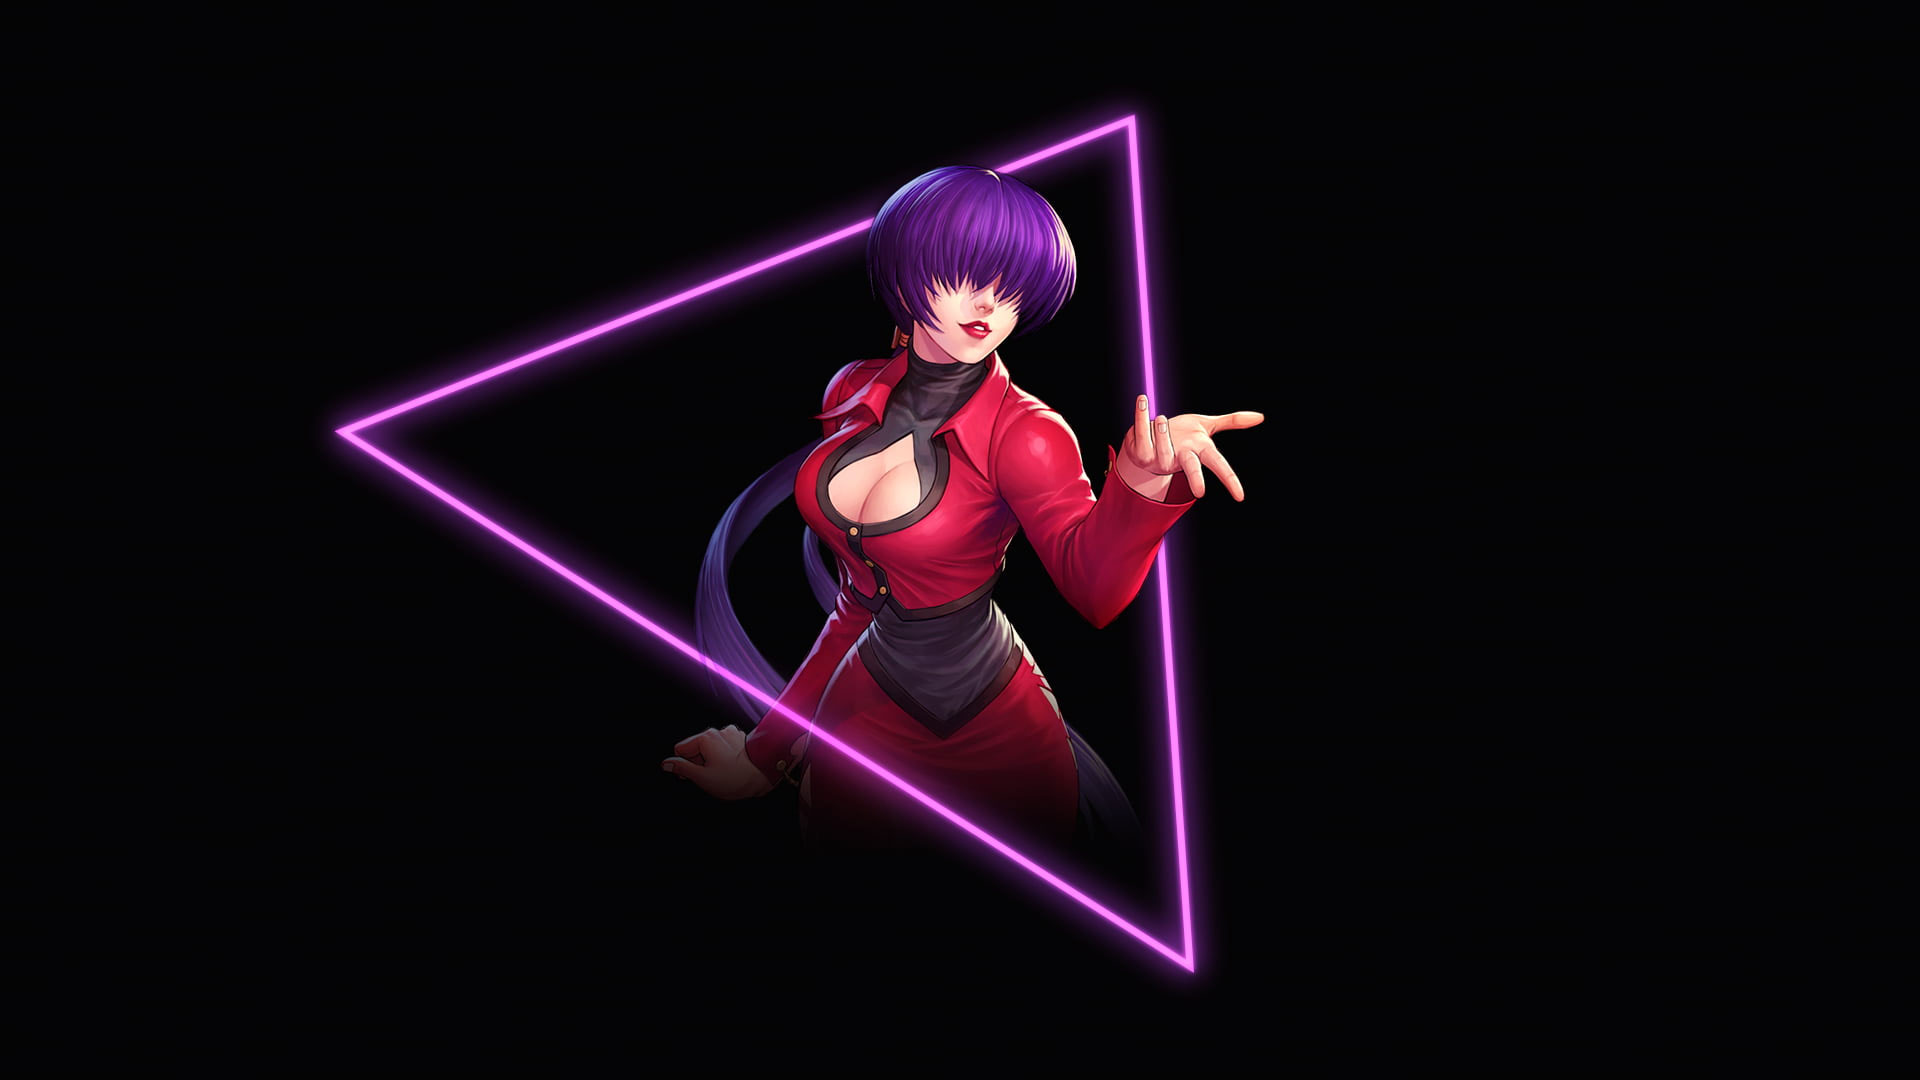 Wallpaper Shermie, King Of Fighters, Video Games